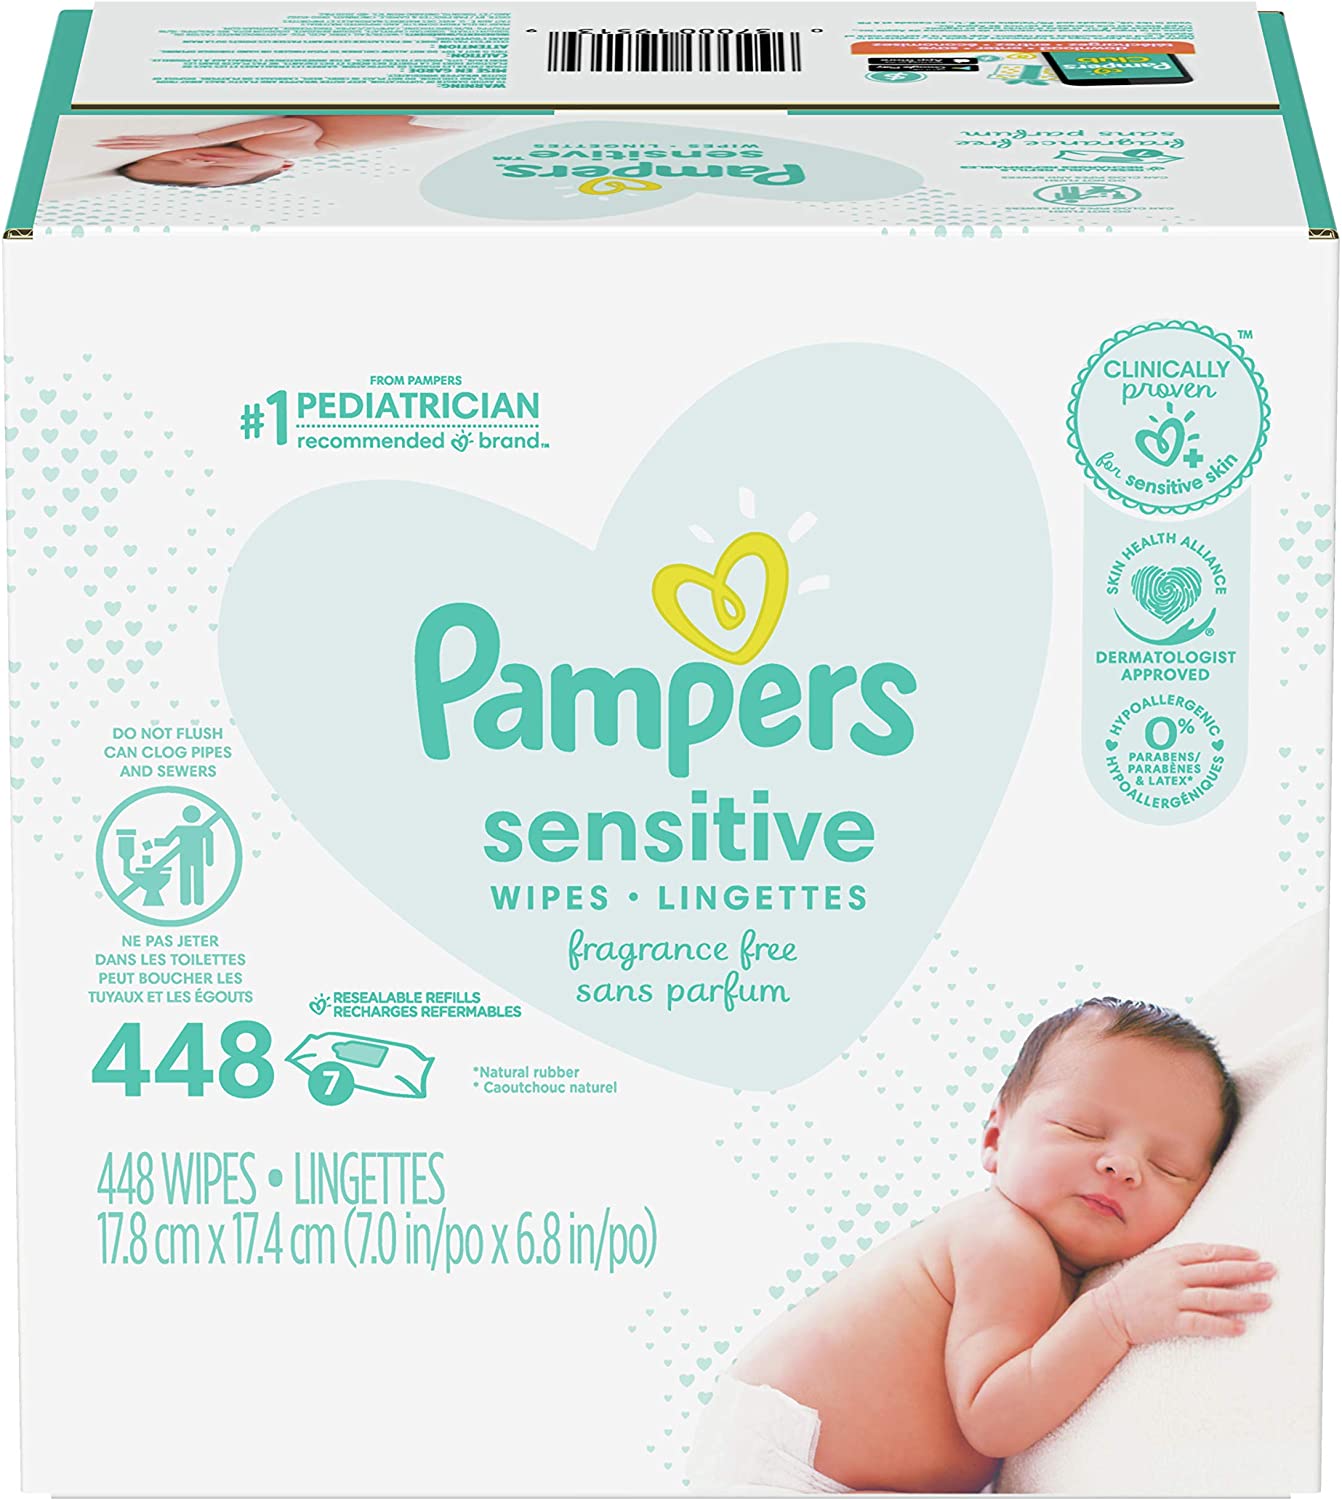 Pampers Baby Wipes Sensitive Perfume Free 7X Refill Packs - 448 Count (Tub Not Included)